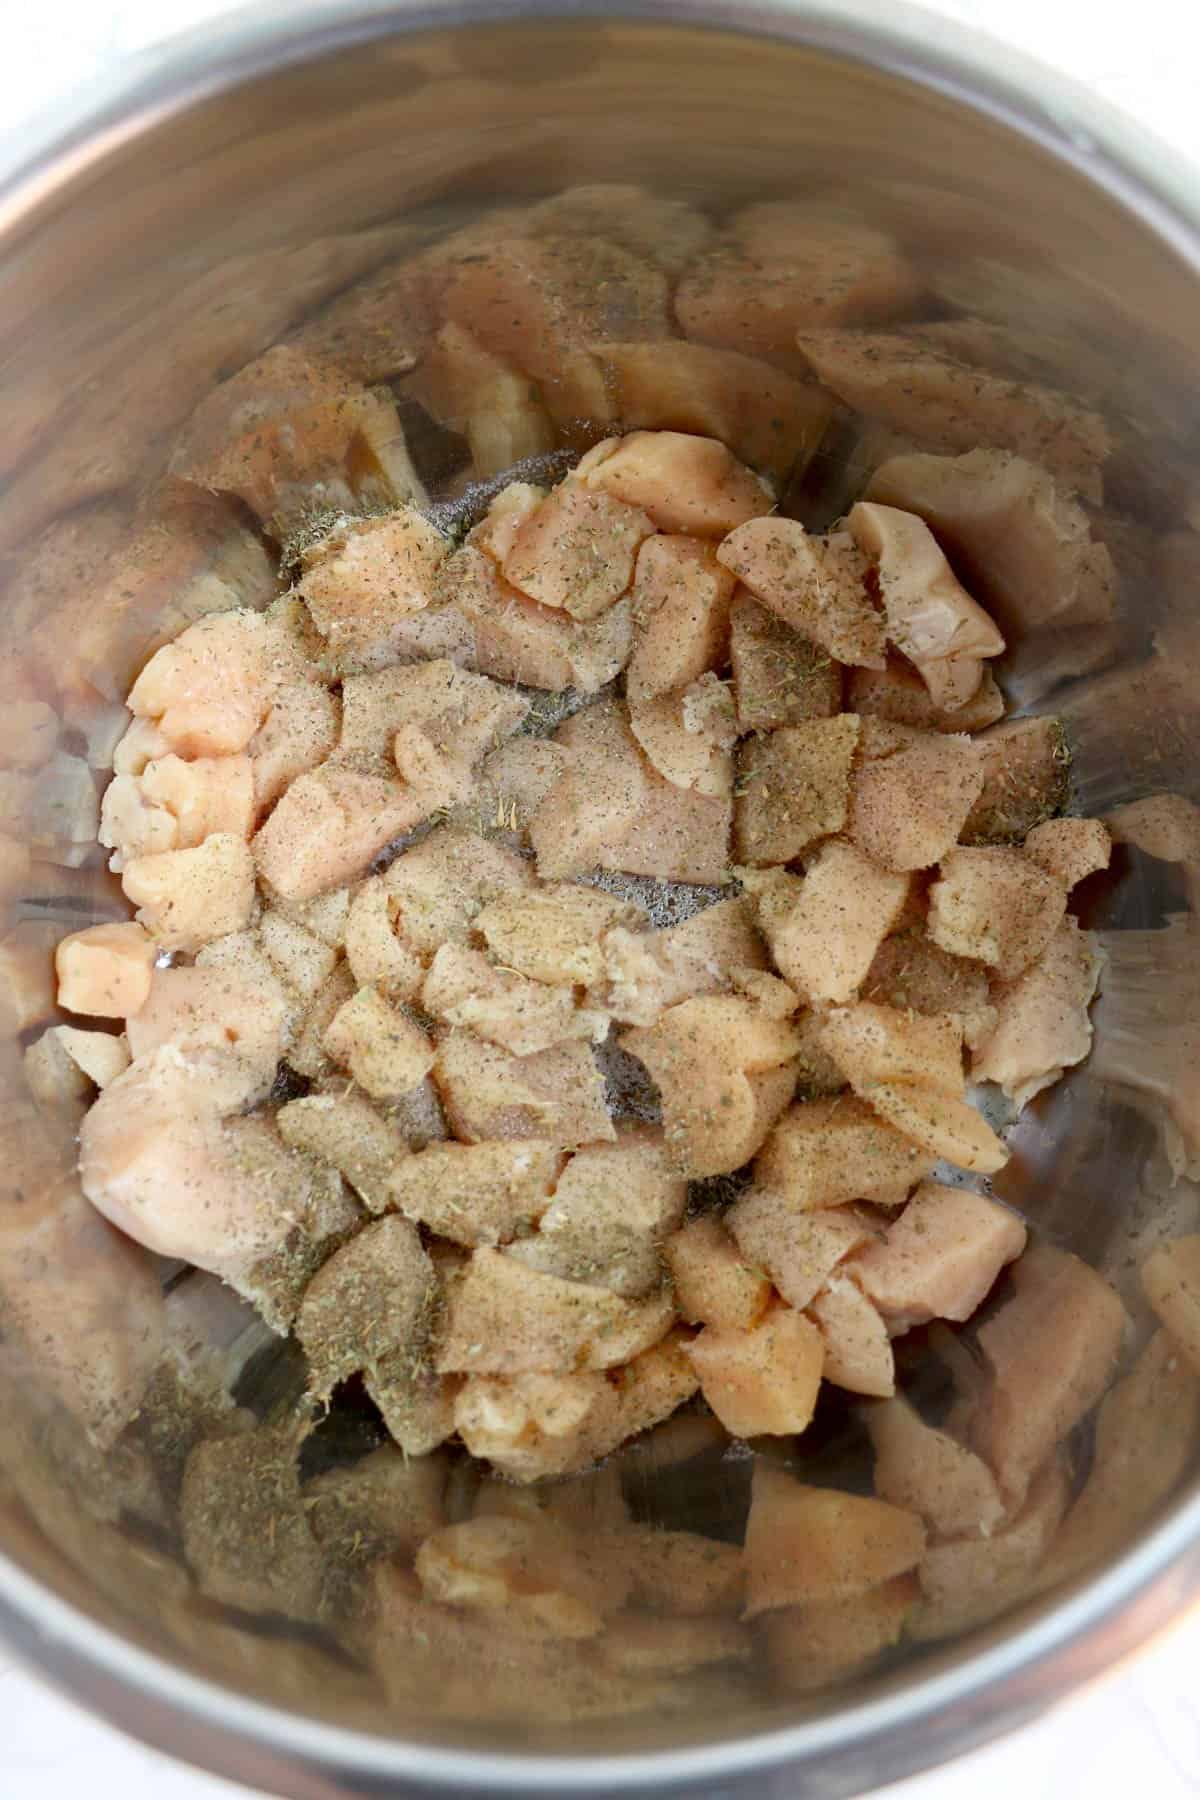 Adding raw chicken chunks with seasoning to the Instant Pot to saute.